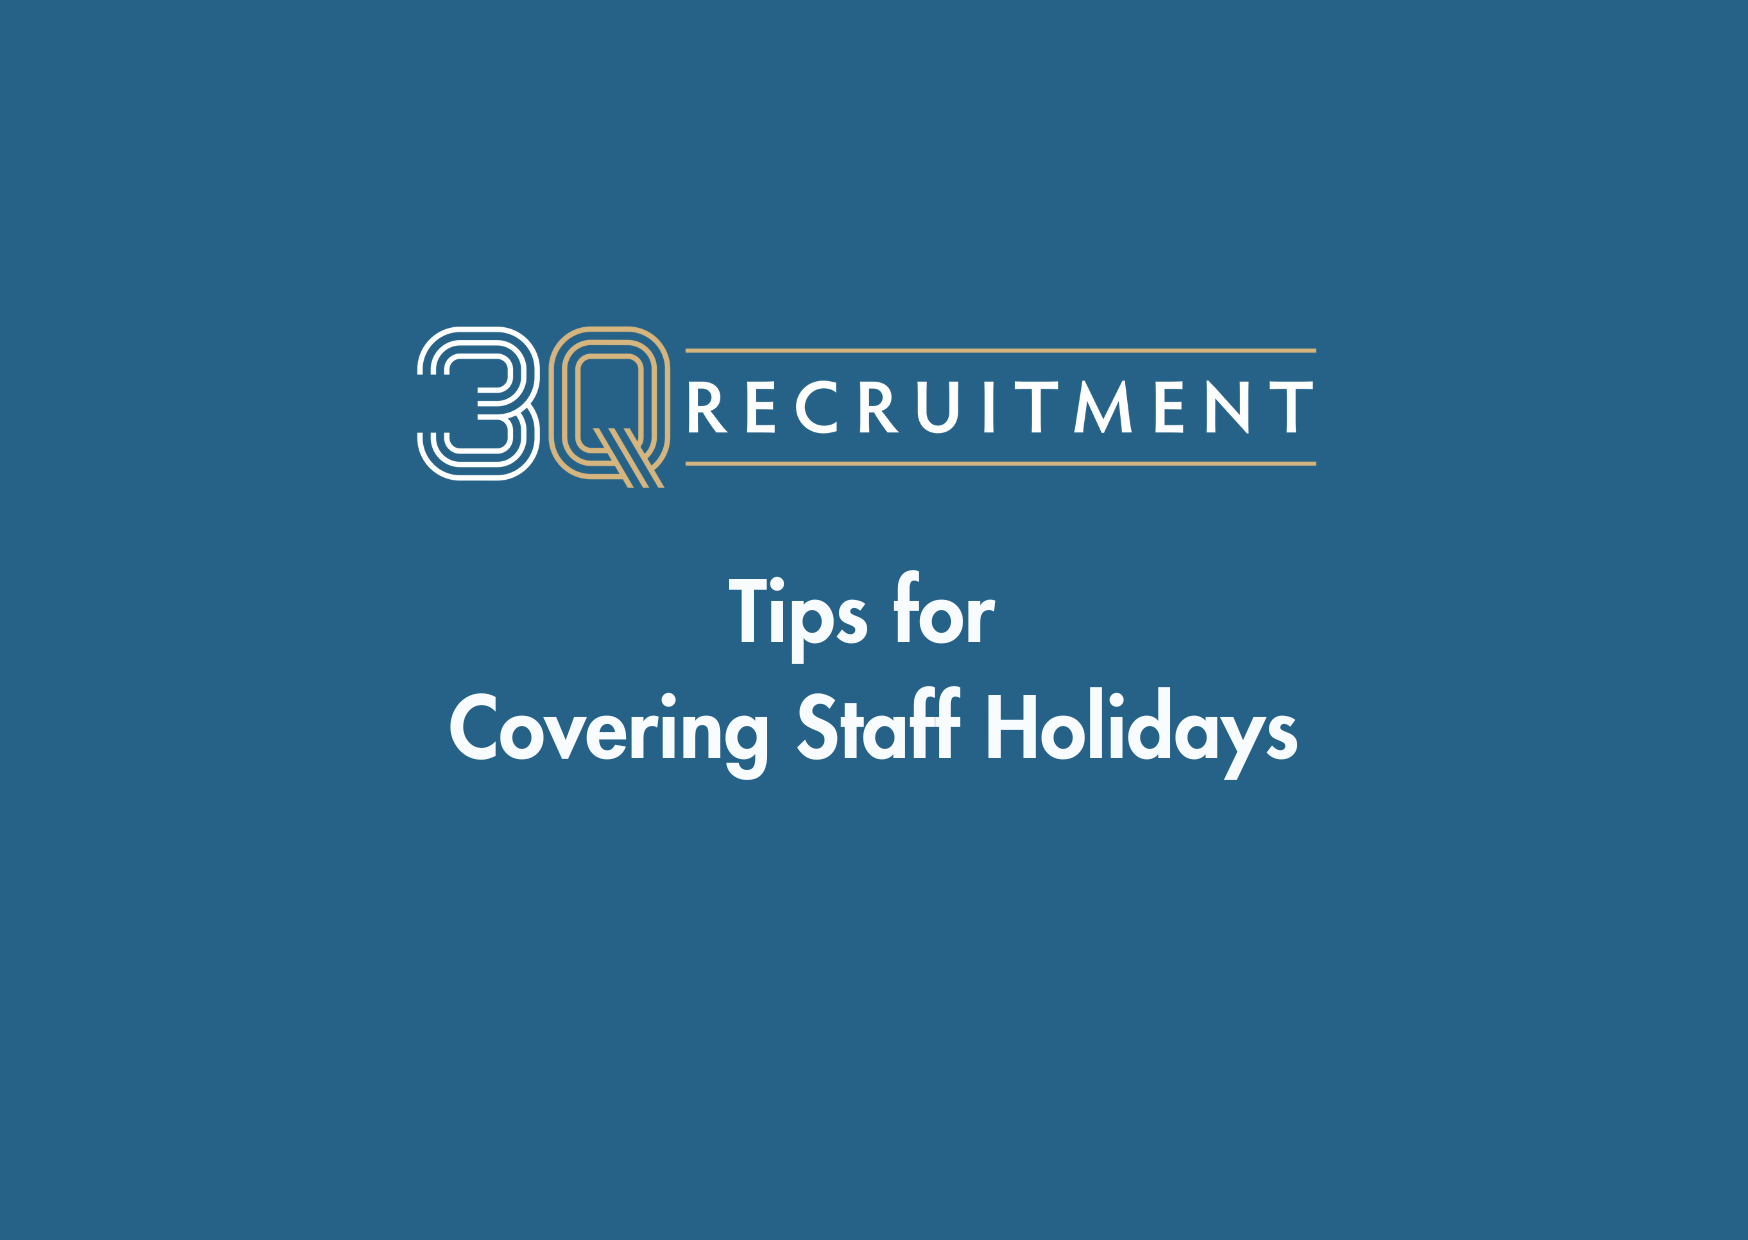 3Q Recruitment Tips for Covering Staff Holidays